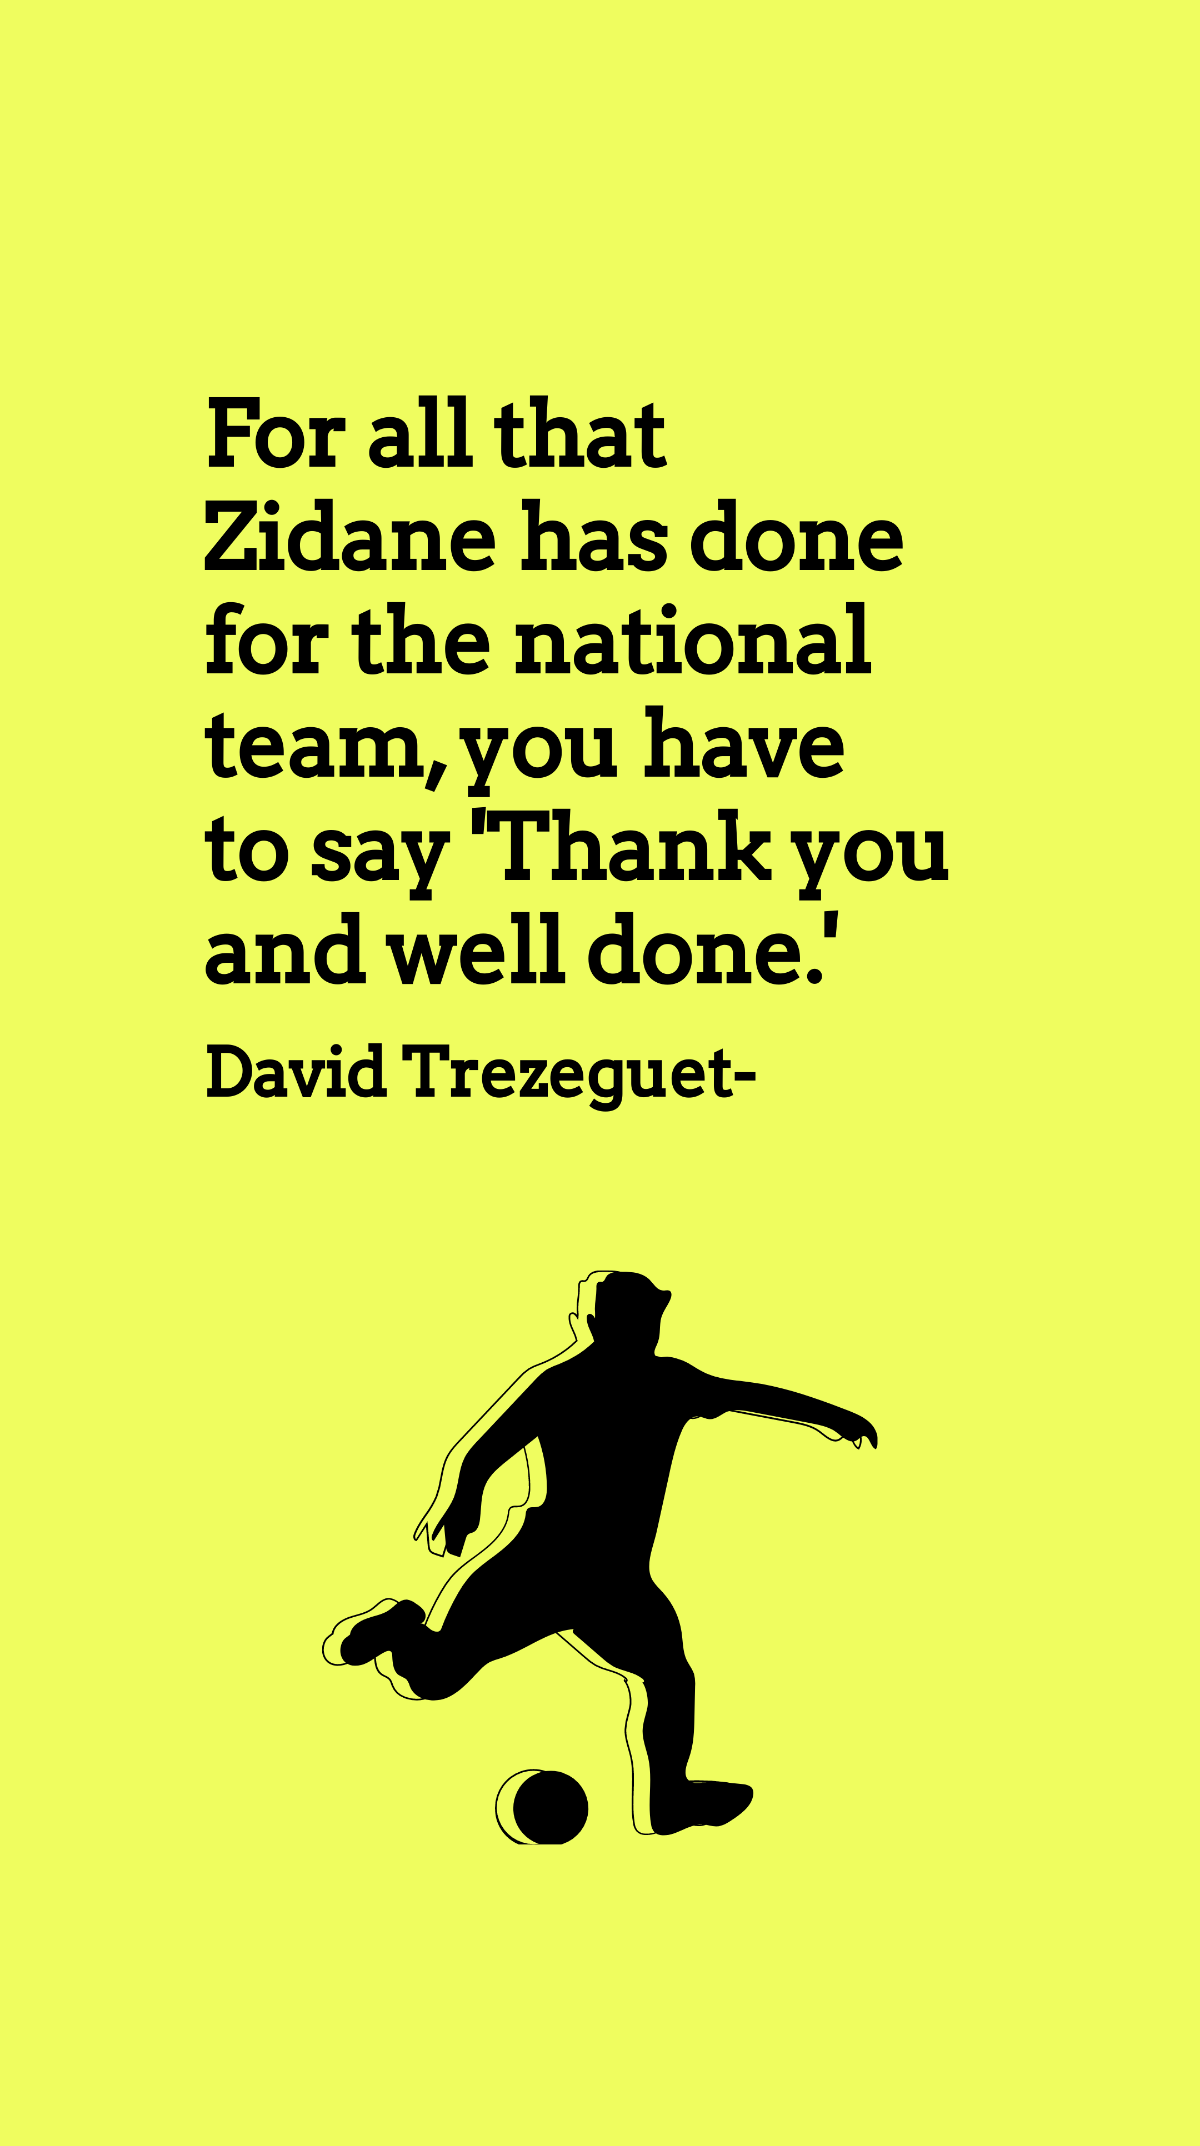 David Trezeguet - For all that Zidane has done for the national team, you have to say 'Thank you and well done.' 